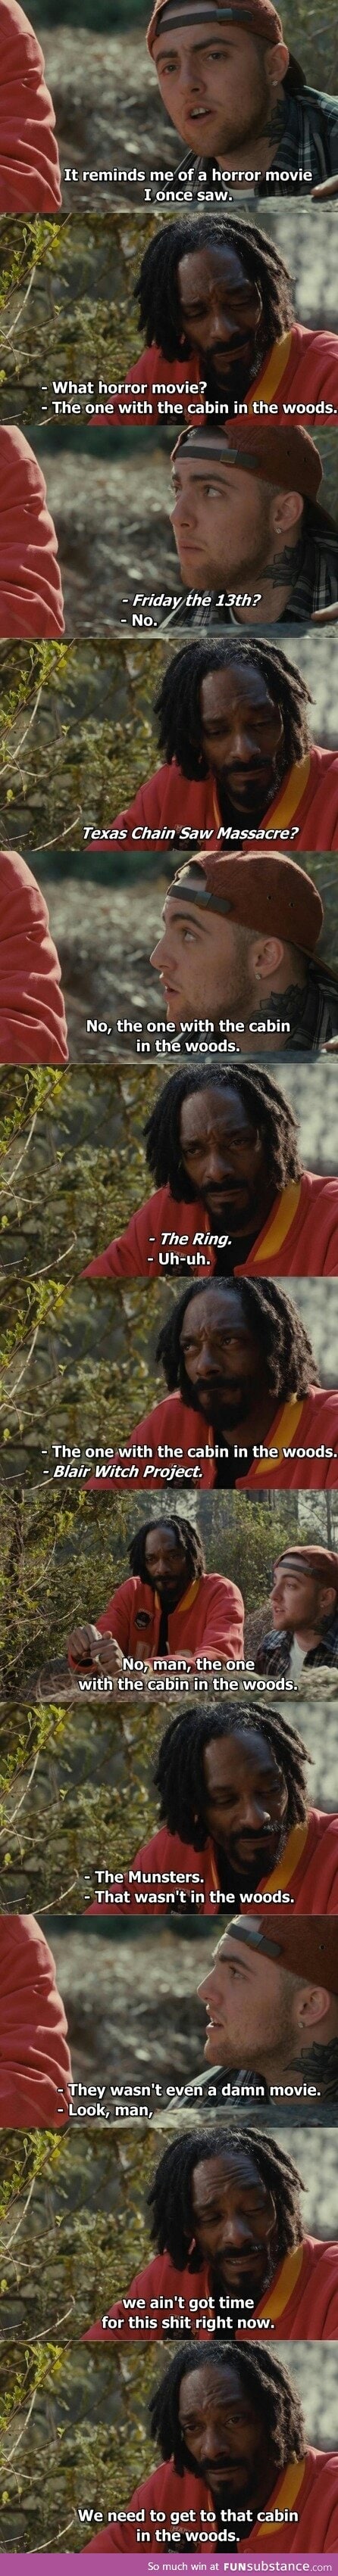 Cabin In The Woods is a movie lol